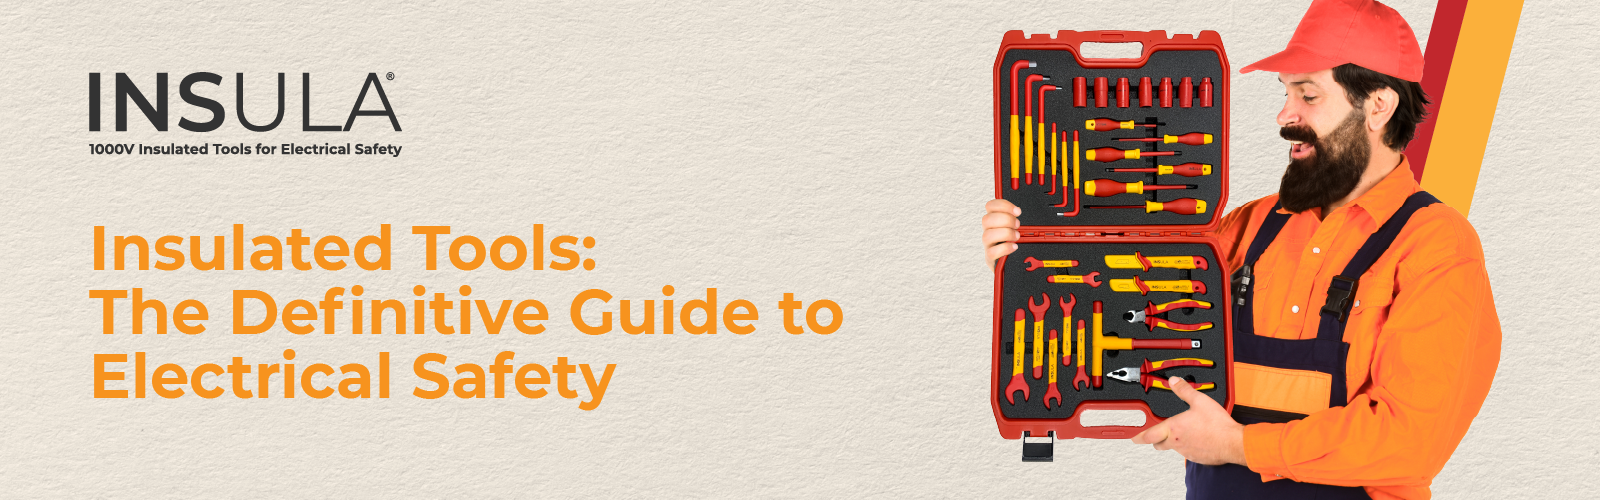 Insulated Tools: The Definitive Guide to Electrical Safety